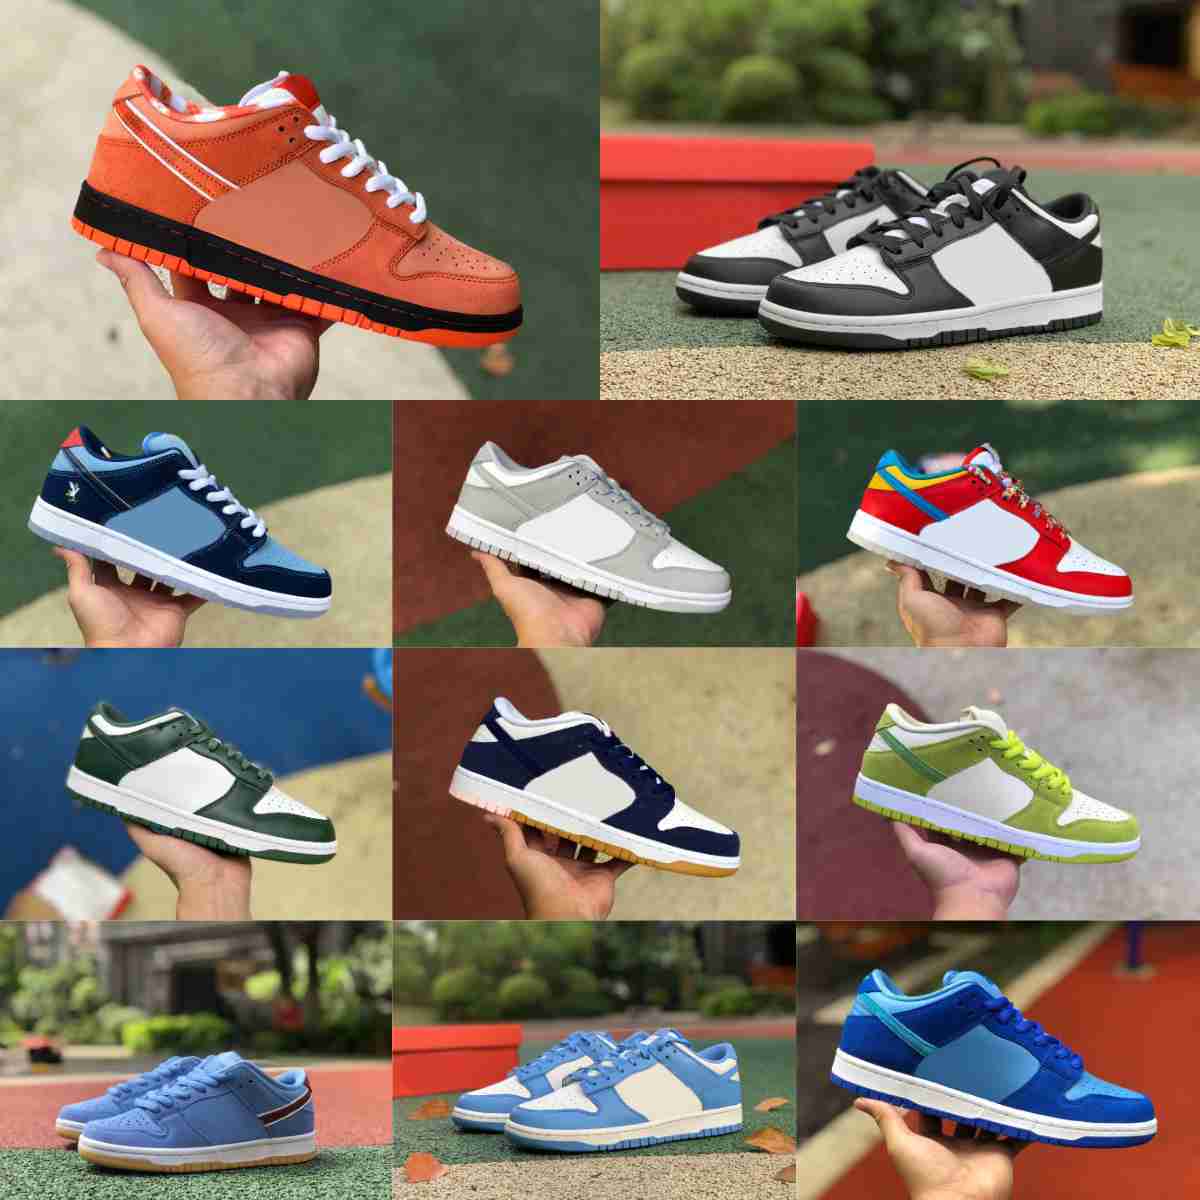 

Trainers DUNKES Mens Women Sports Shoes SB Grey Fog Why So Sad White Black Mummy Green Fruity Pebbles LA Dodgers Medium Curry Phillies UNC Trainer Sports Sneakers, Please contact us